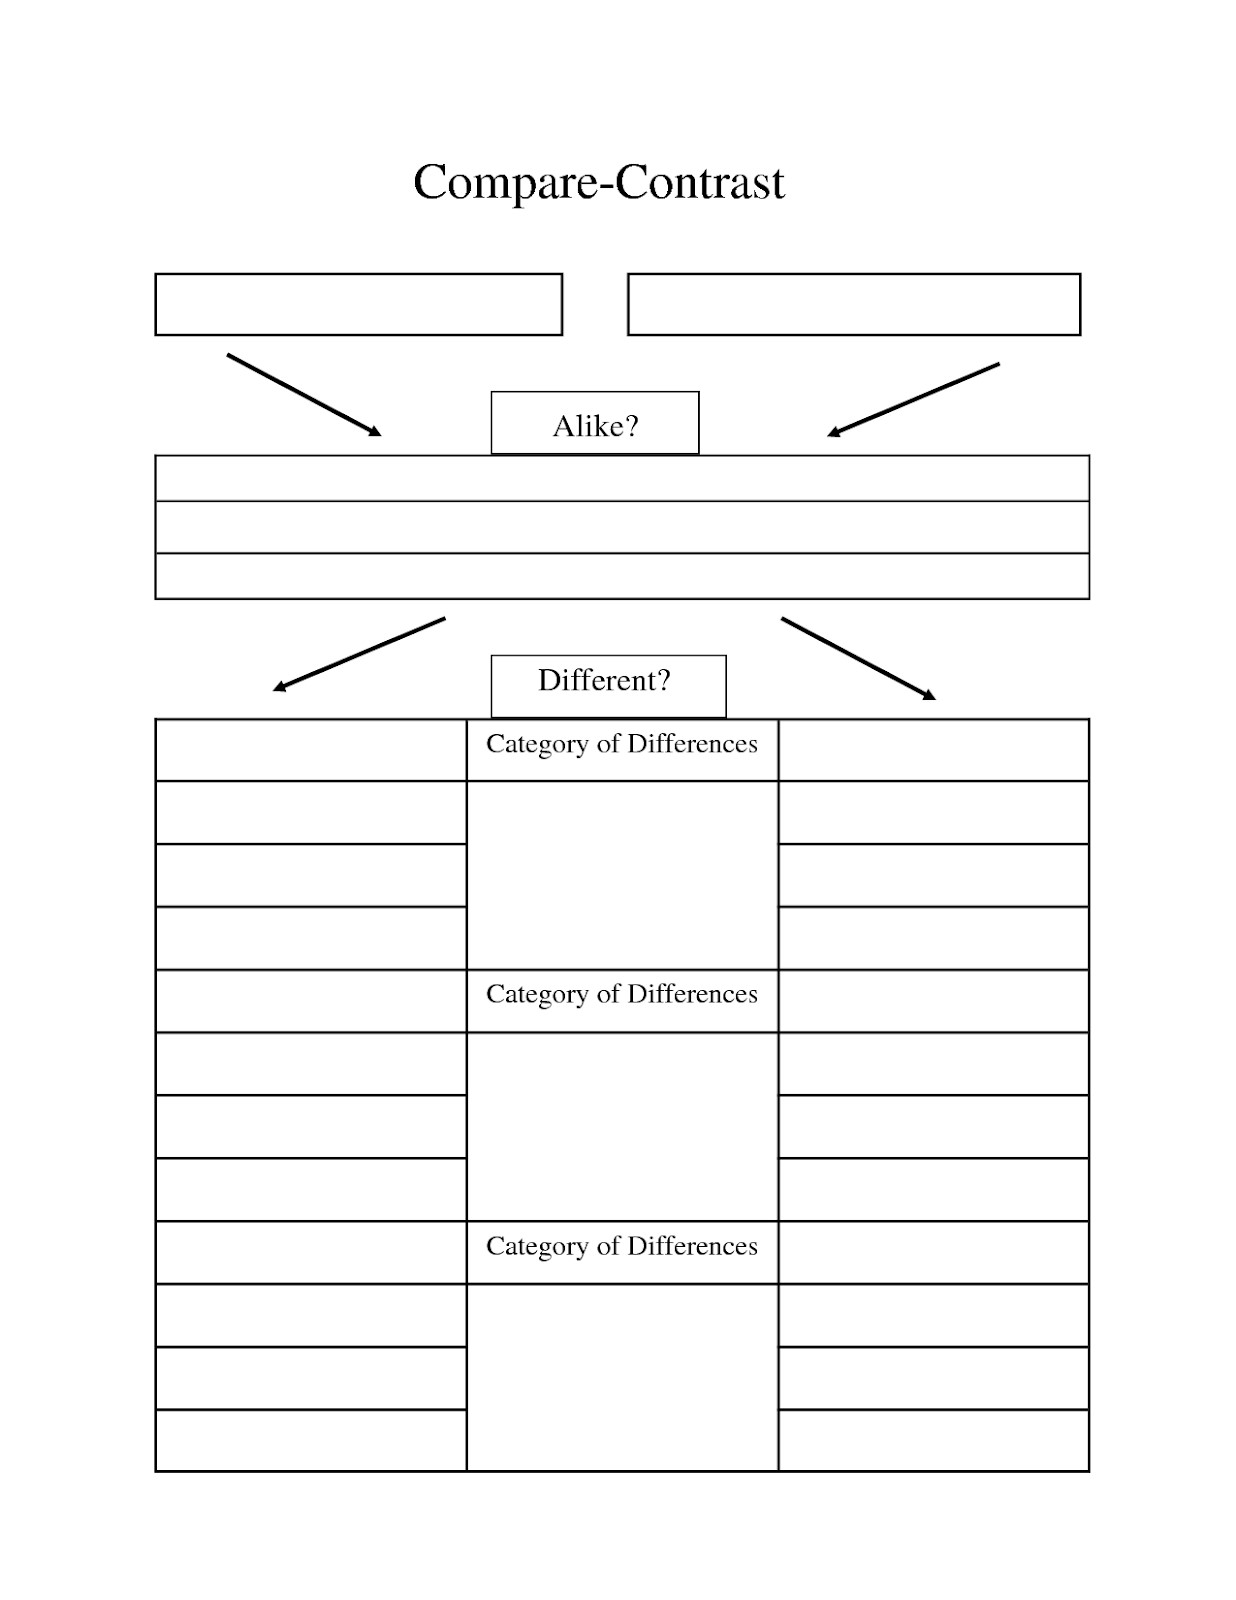 complete-guide-to-write-a-compare-and-contrast-essay-outline